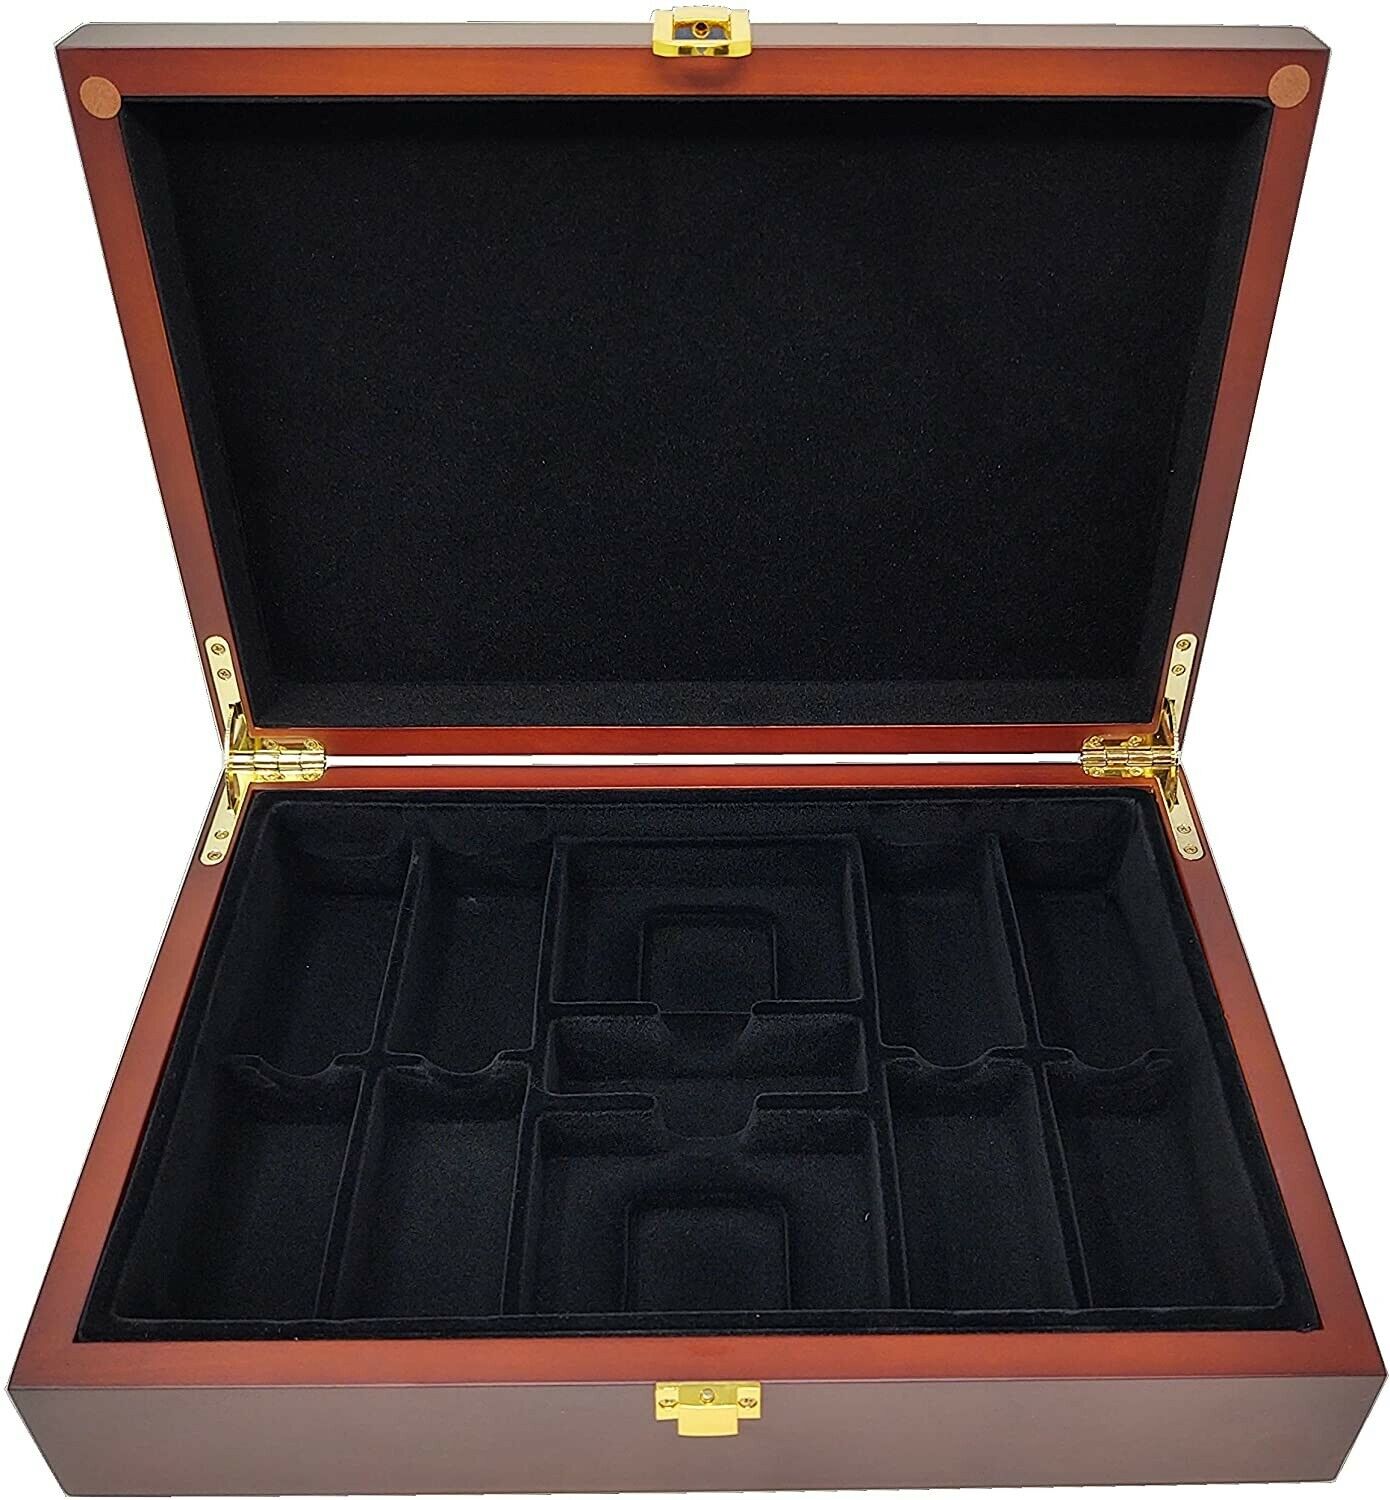 DA VINCI Mahogany Wood Poker Case with 200 Chip Capacity (Chips not Included)